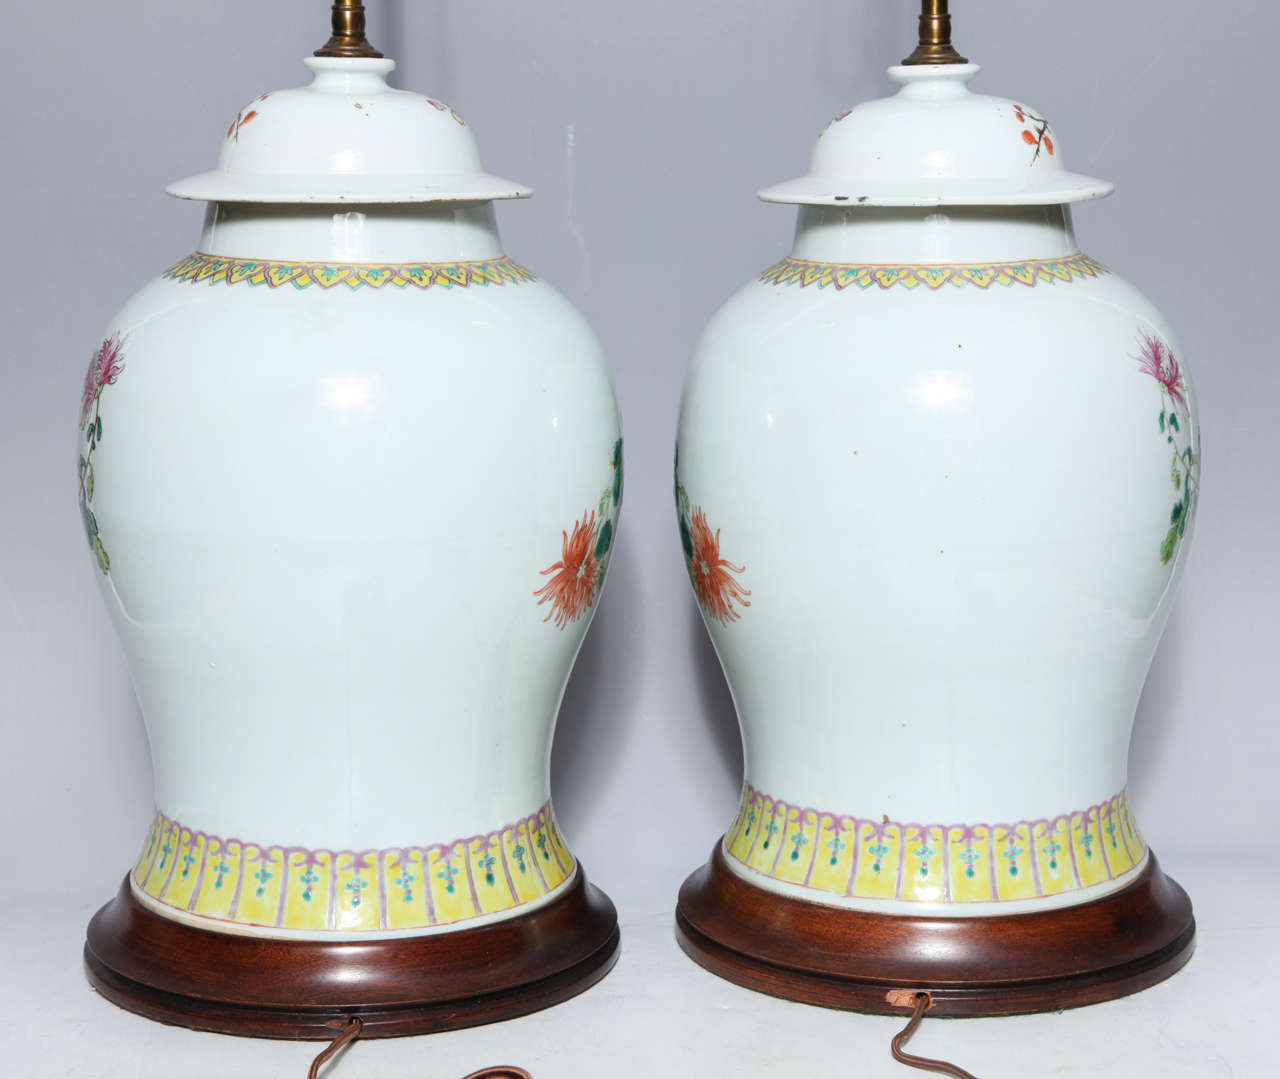 Pair of 19th Century Chinese Porcelain Ginger Jars Converted into Table Lamps For Sale 4